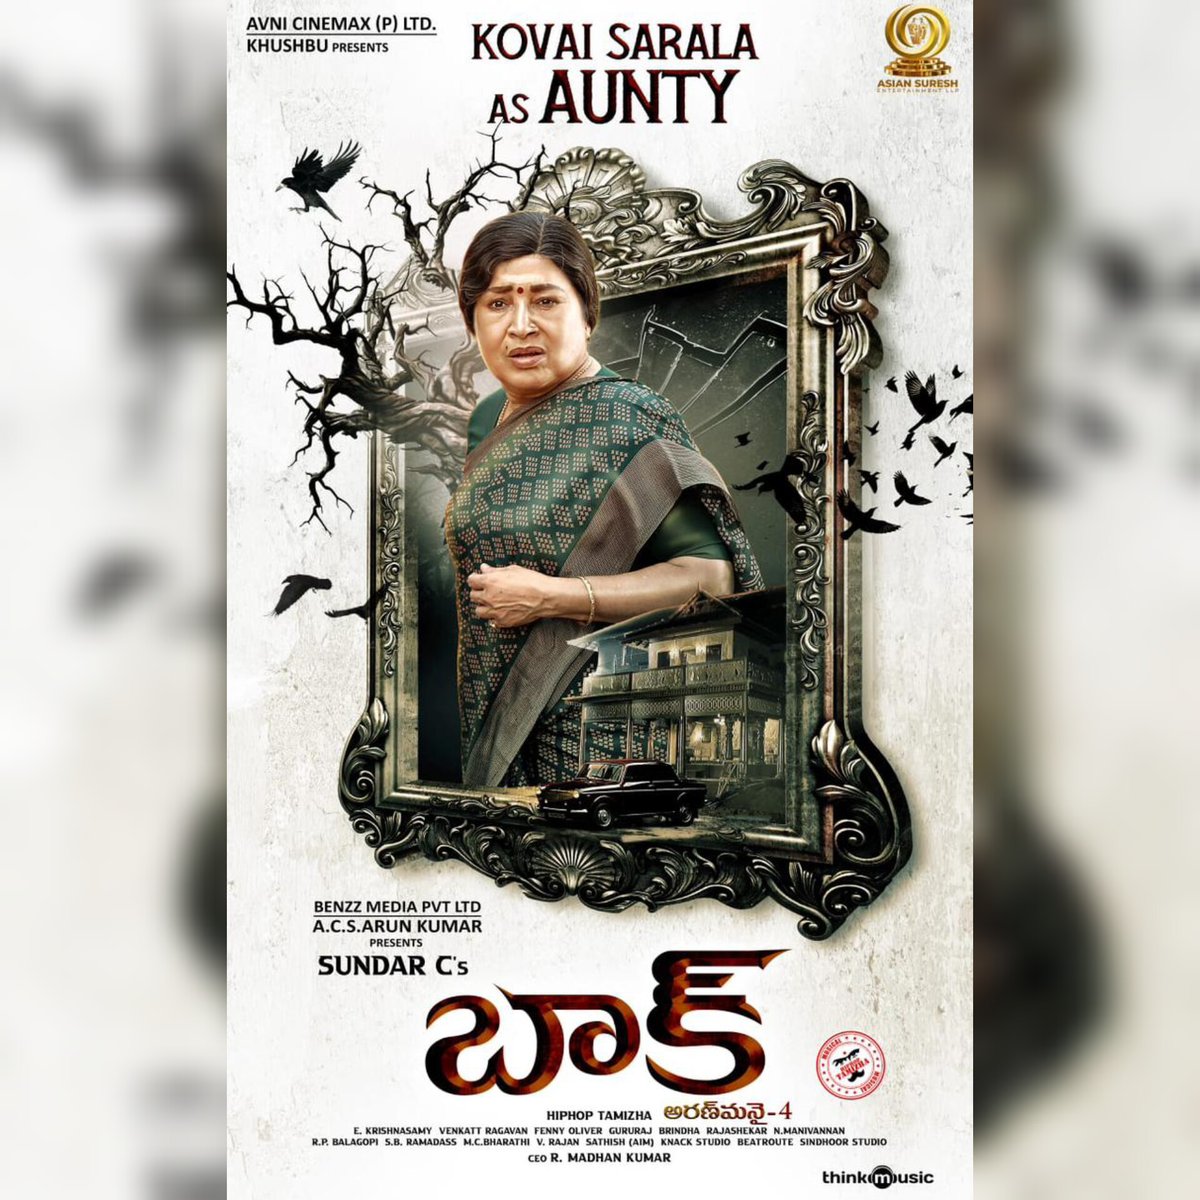 Our Favourite AUNTY Is Back😍

Meet #KovaiSarala Garu Brings Her Laughter Magic to the World Of #Baak🦇

In Cinemas On APRIL 2️⃣6️⃣th.
Telugu Release  - @asiansureshent